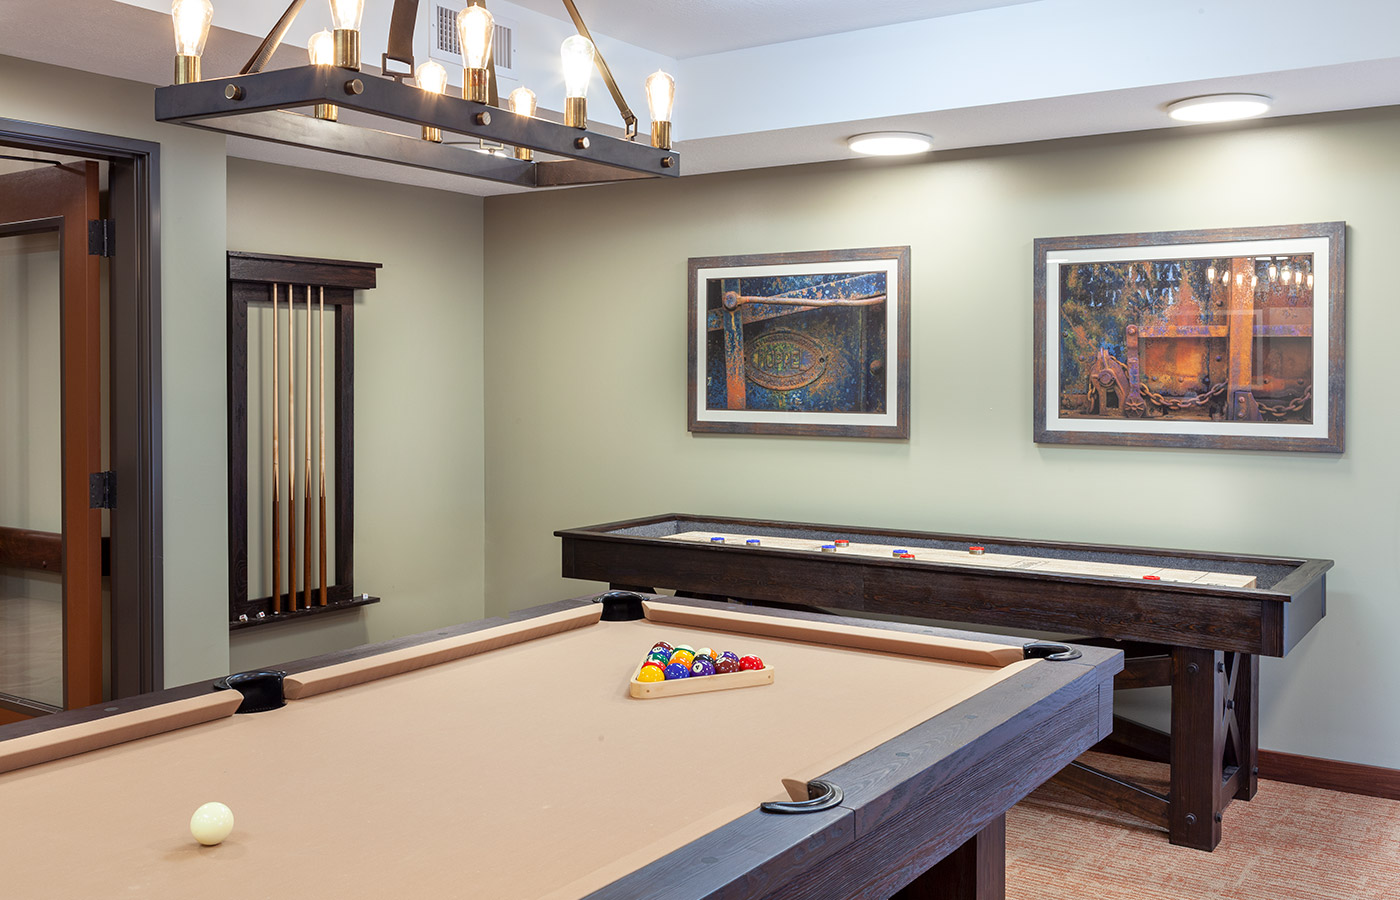 Pool table in game room.